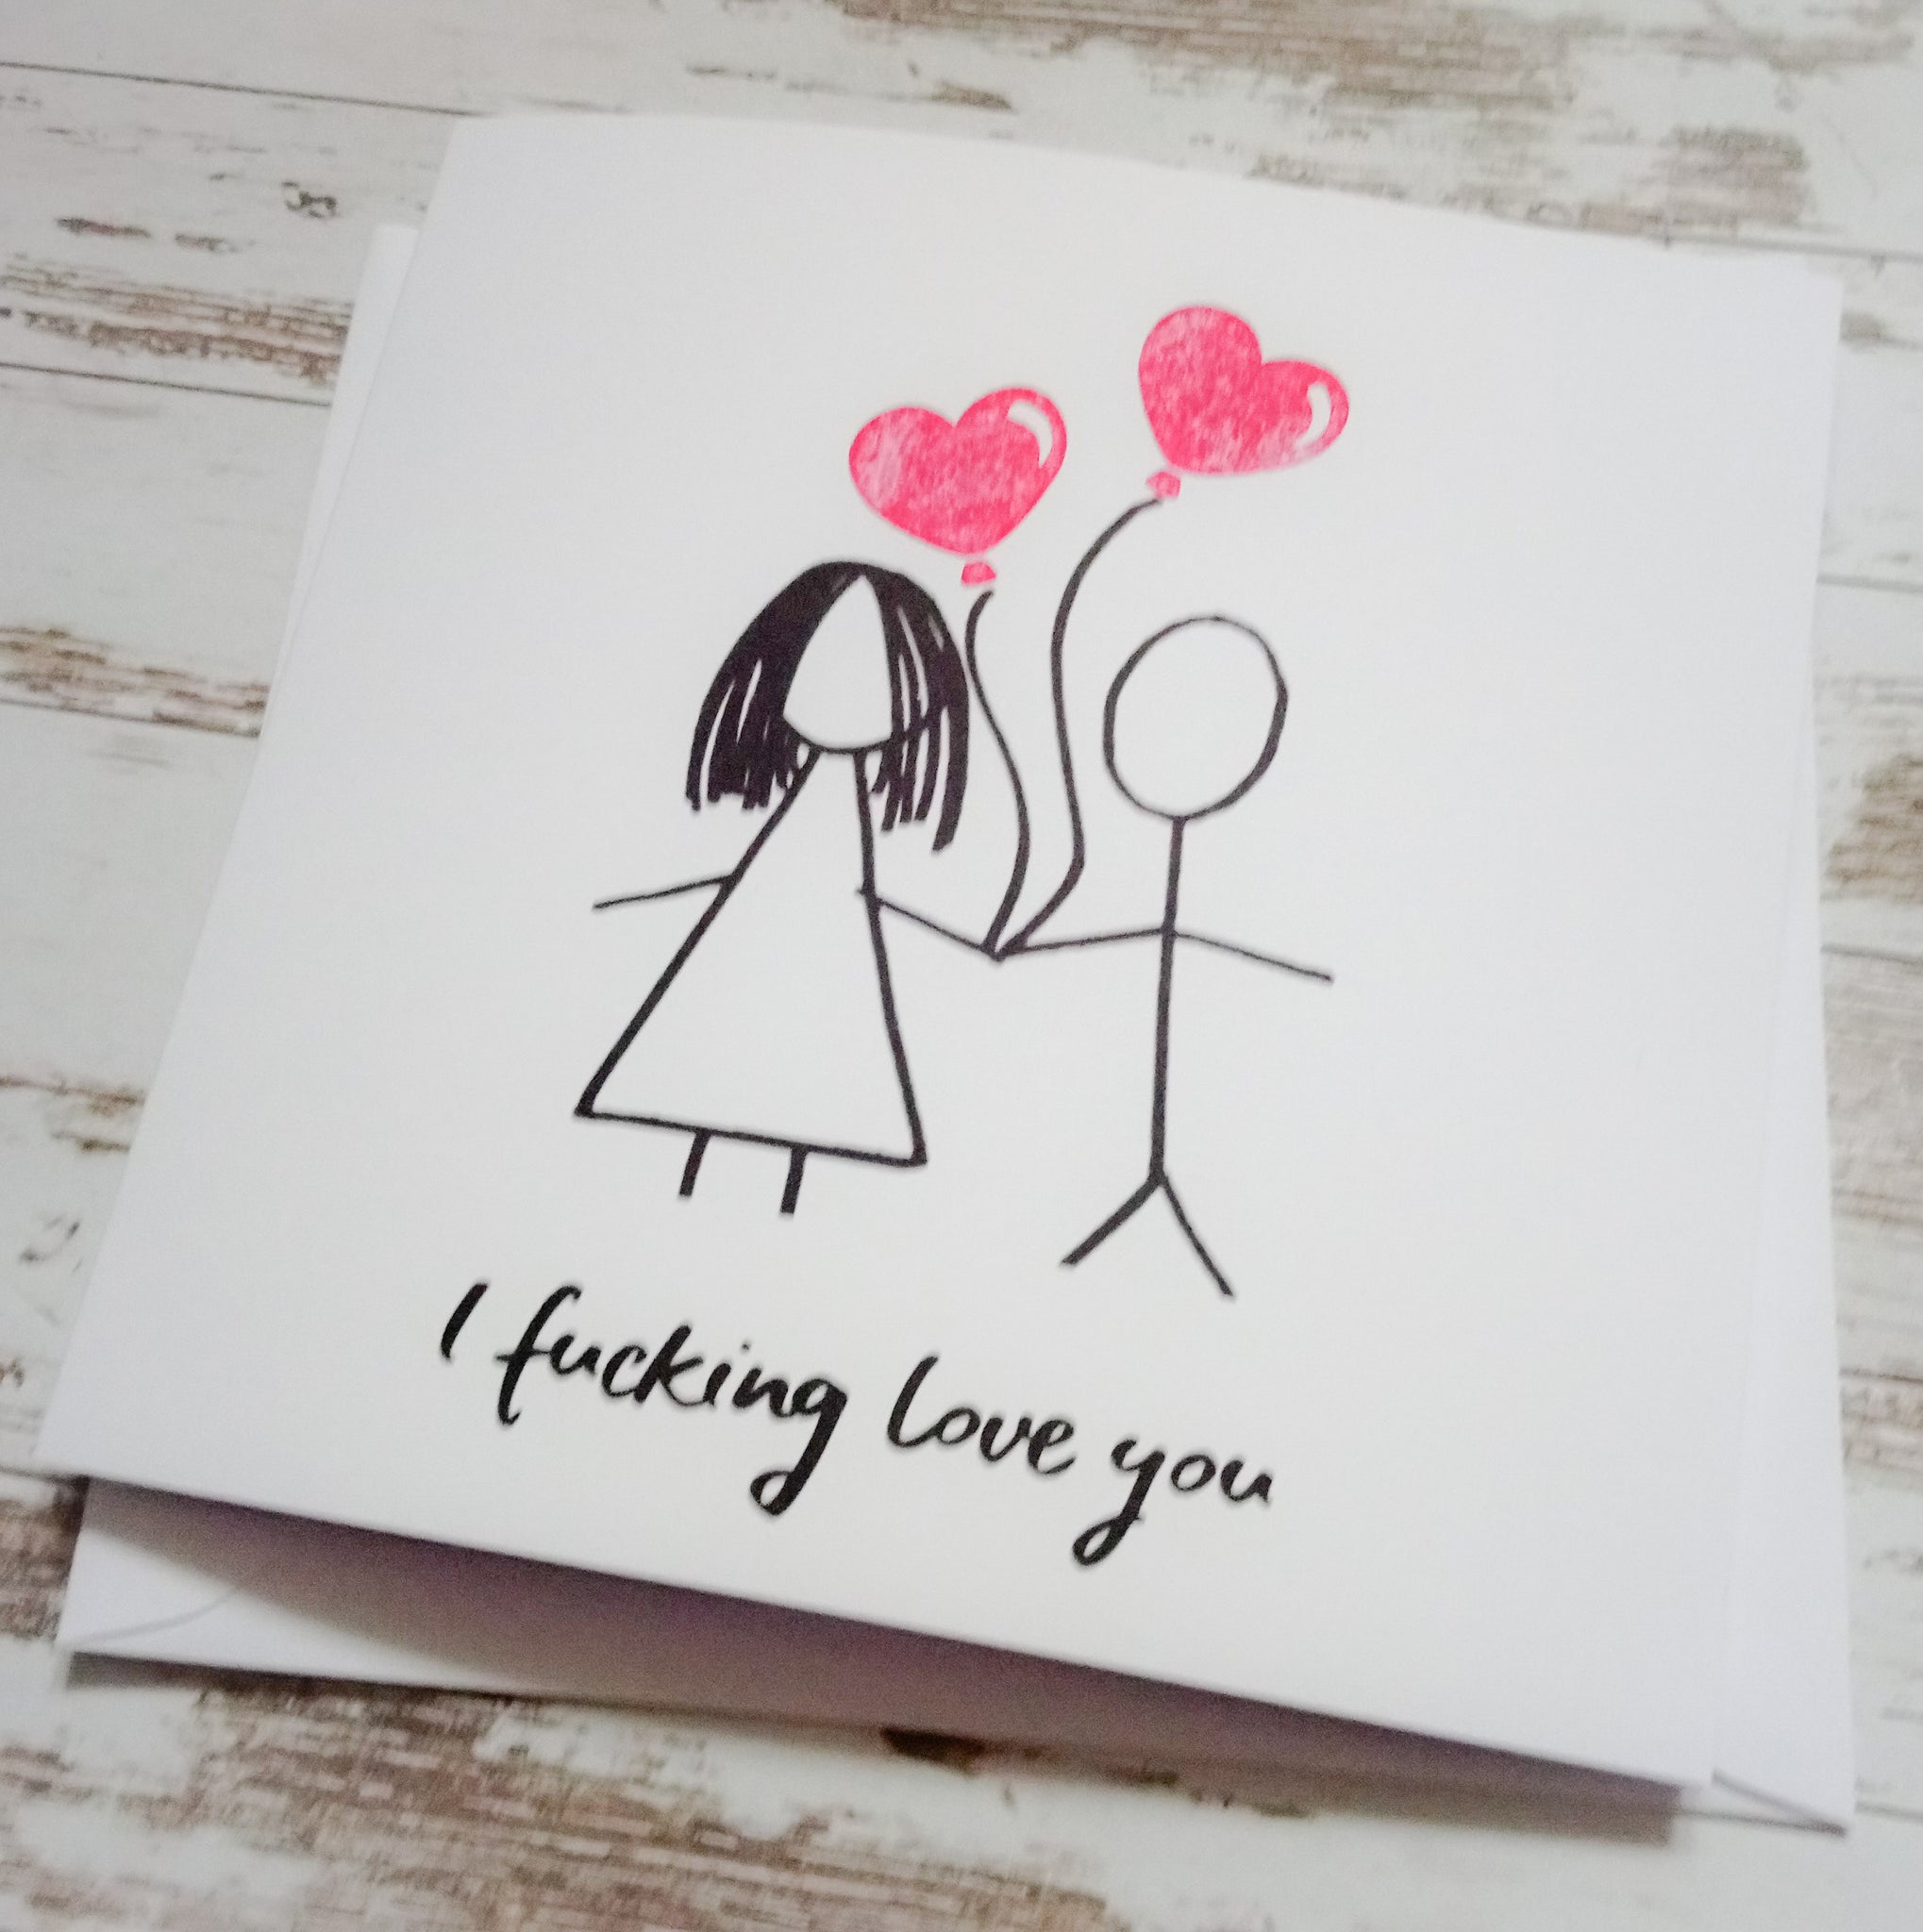 Funny cheeky rude "I f*ucking love you" stick people card with hand stamped heart balloons - Valentine's, wedding, anniversary